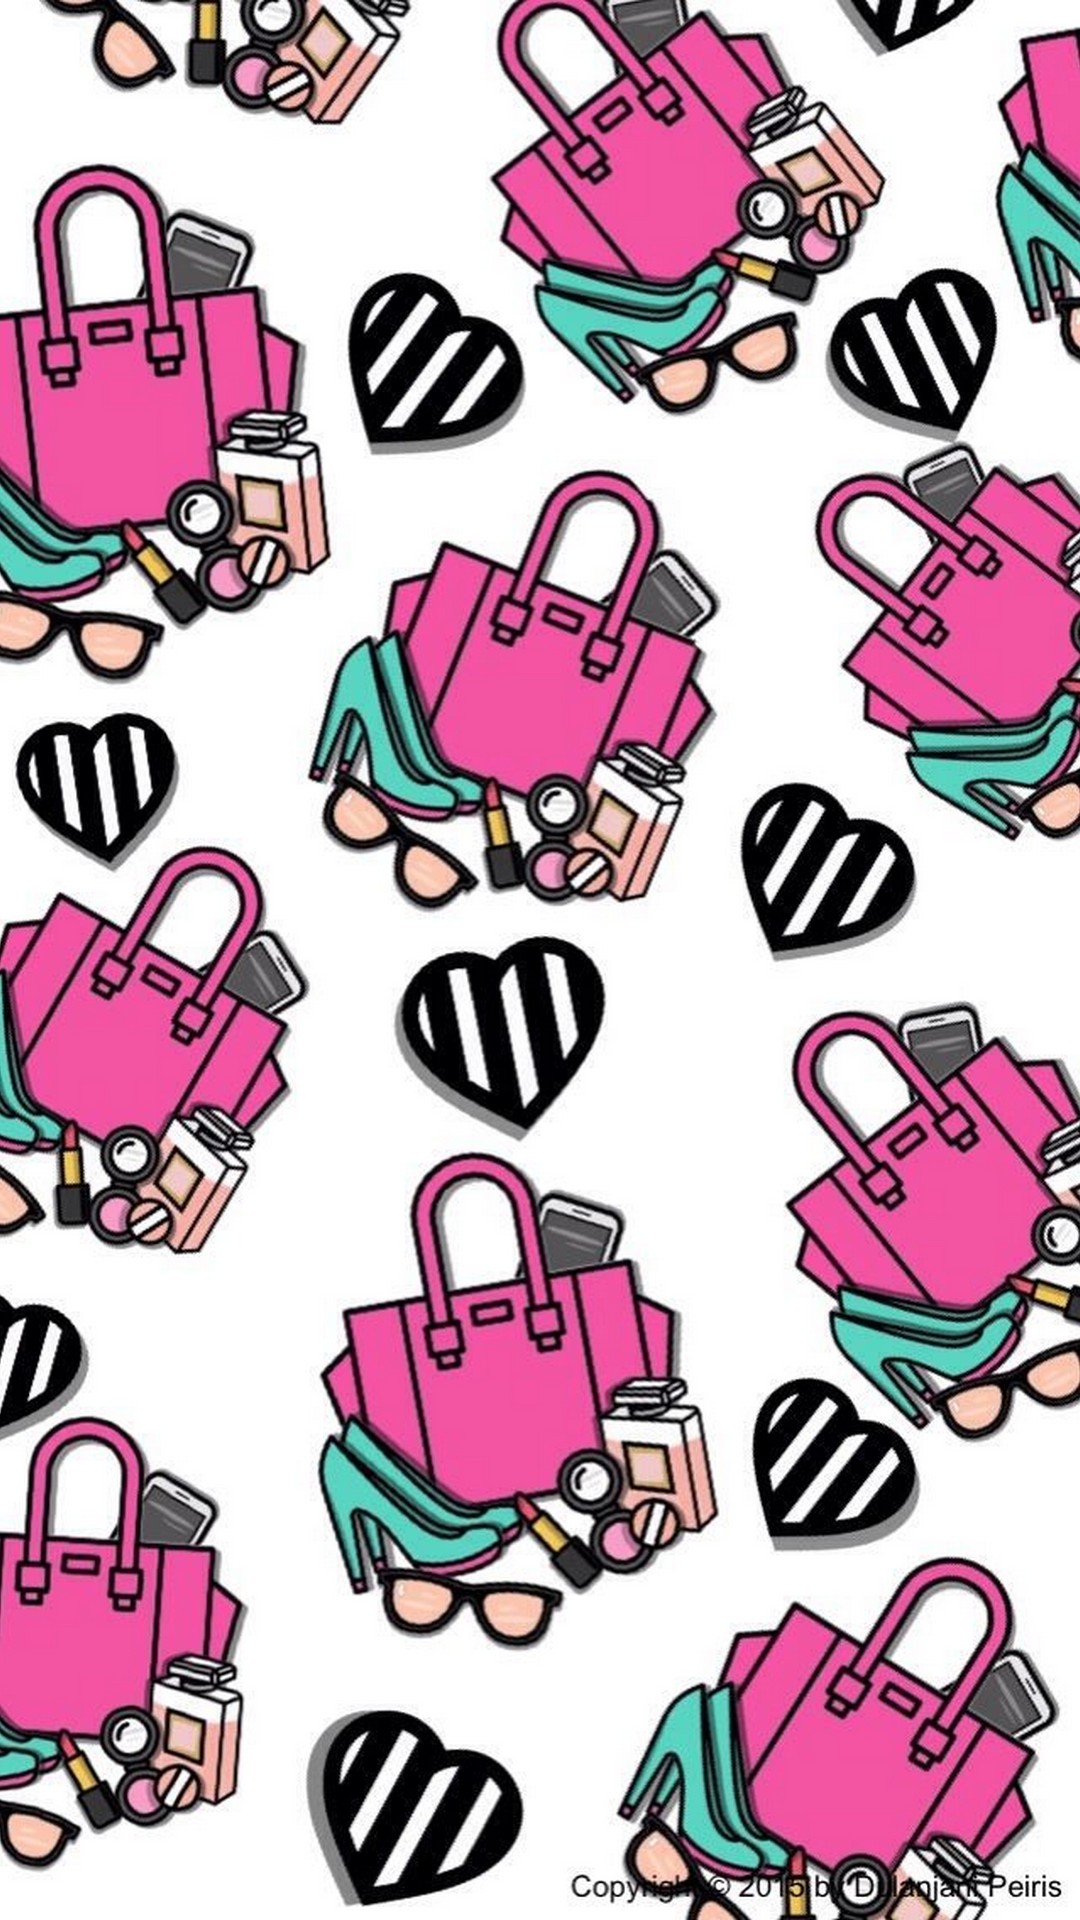 Cute Girly Fashion Wallpaper For Android